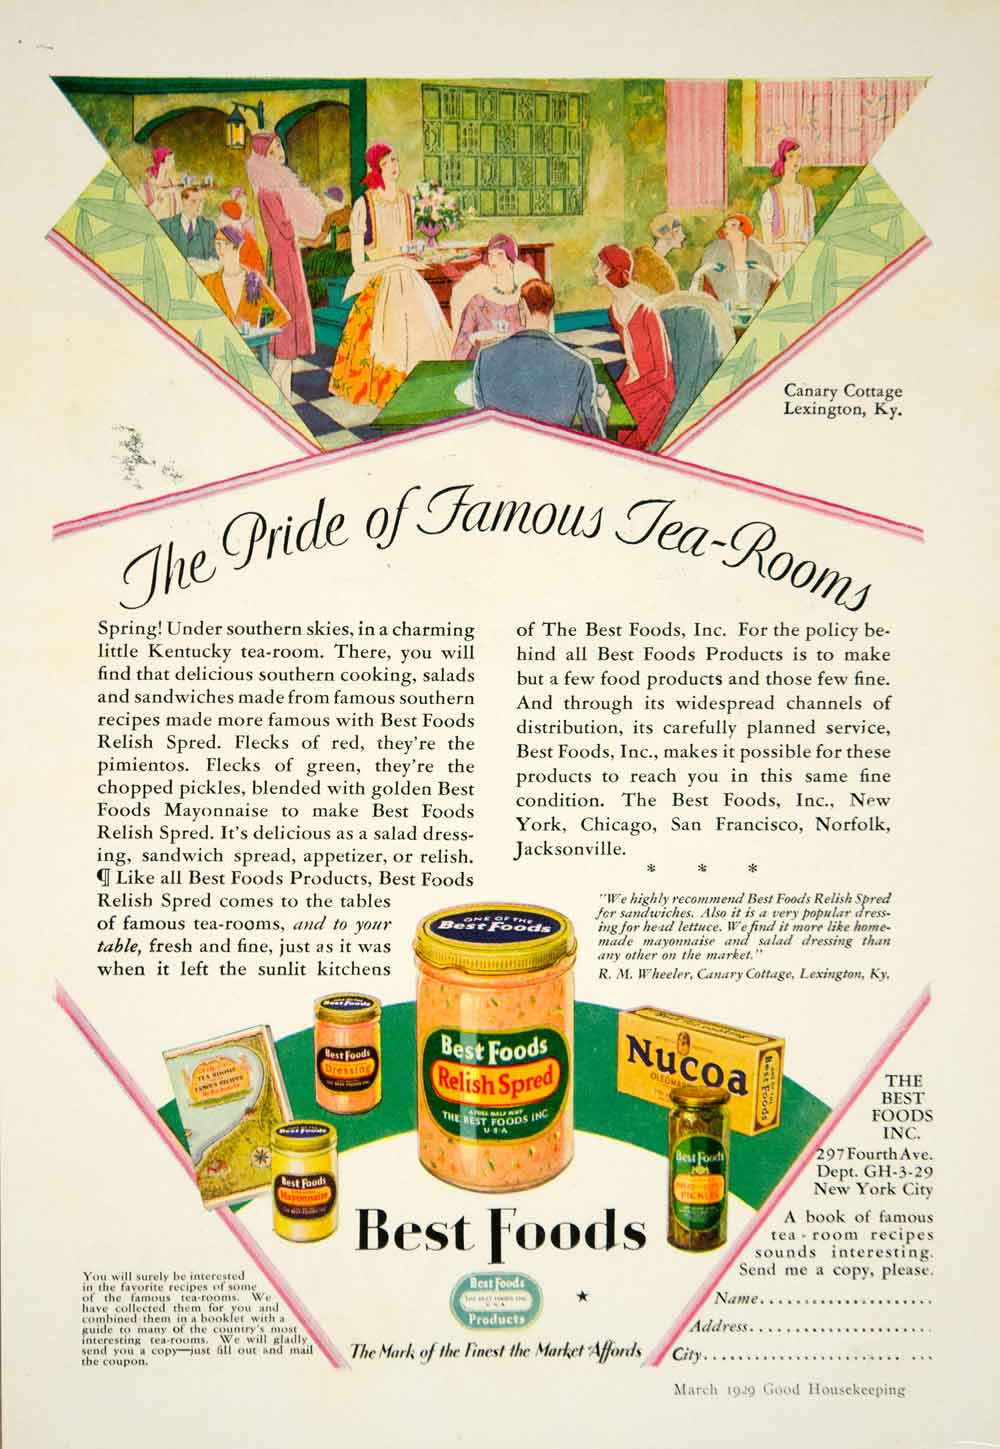 1929 Ad Best Foods Relish Spred Art Deco RM Wheeler Canary Cottage KY Mayo YGH1